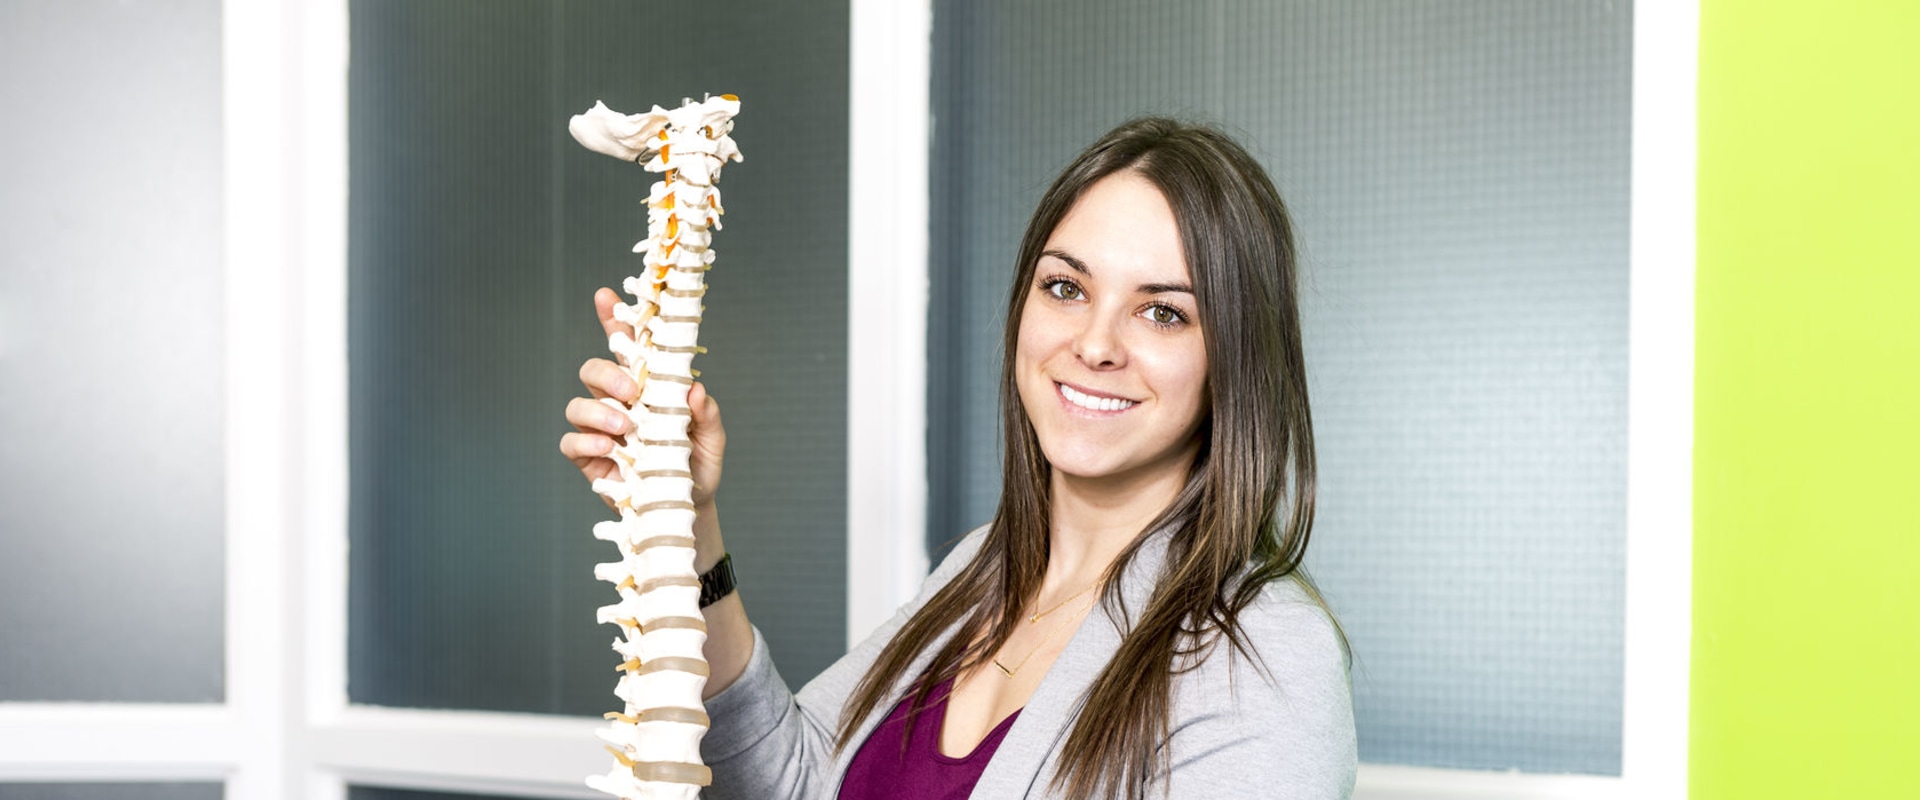 Are osteopaths really doctors?